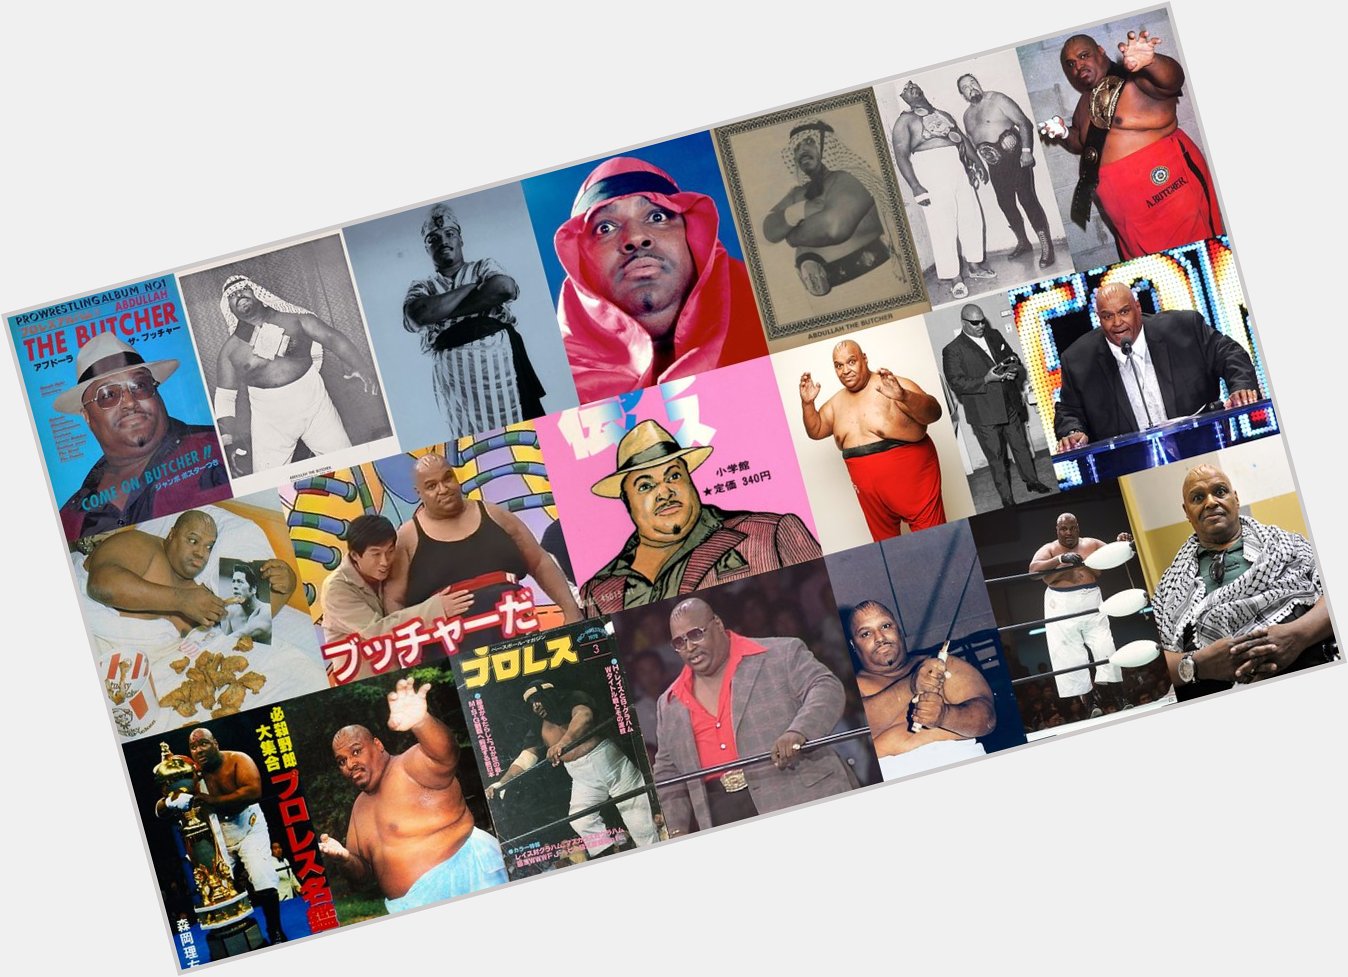 Happy 80th birthday to the Madman from the Sudan Abdullah the Butcher.  